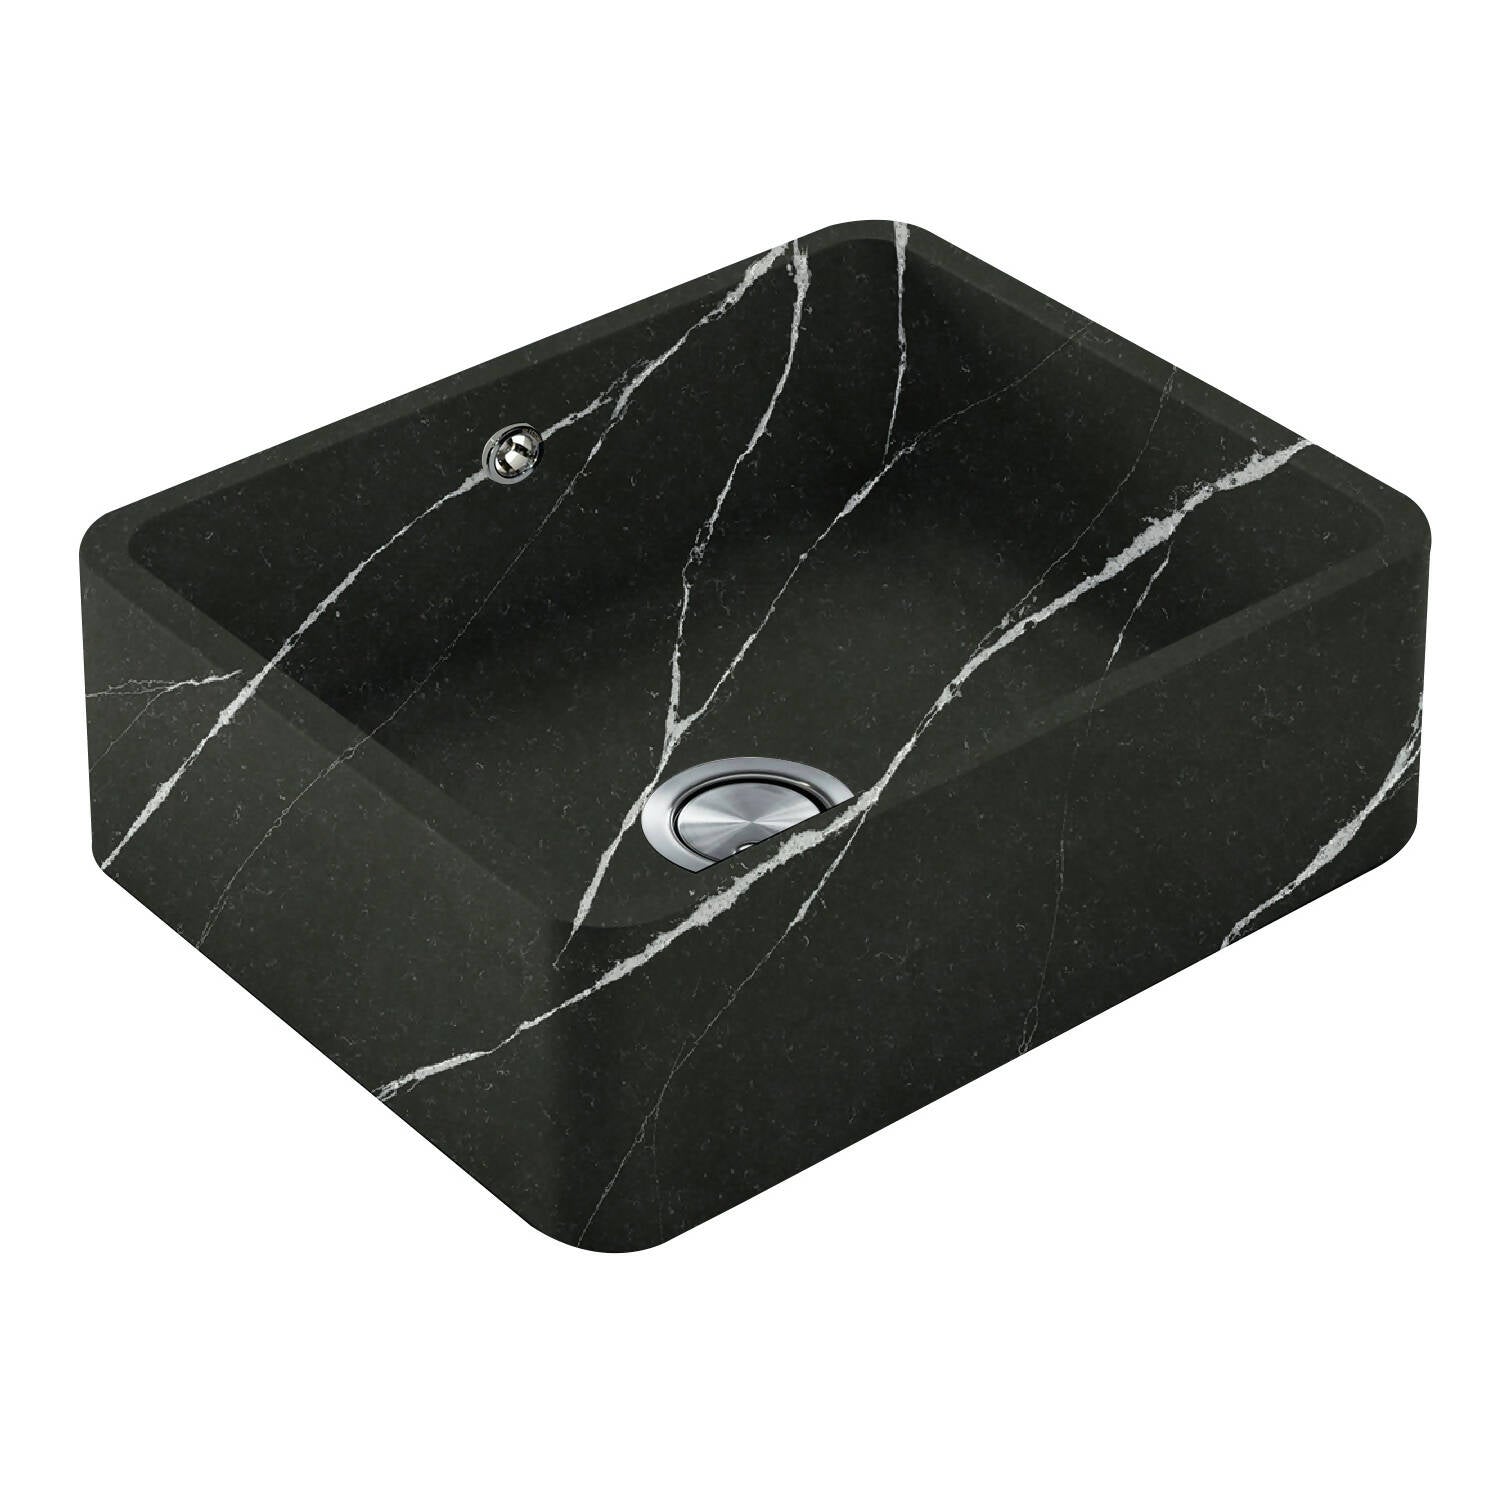 ET. MARQUINA INTEGRITY SINK,Stone Sink,Cosentino Sink,www.work-tops.com